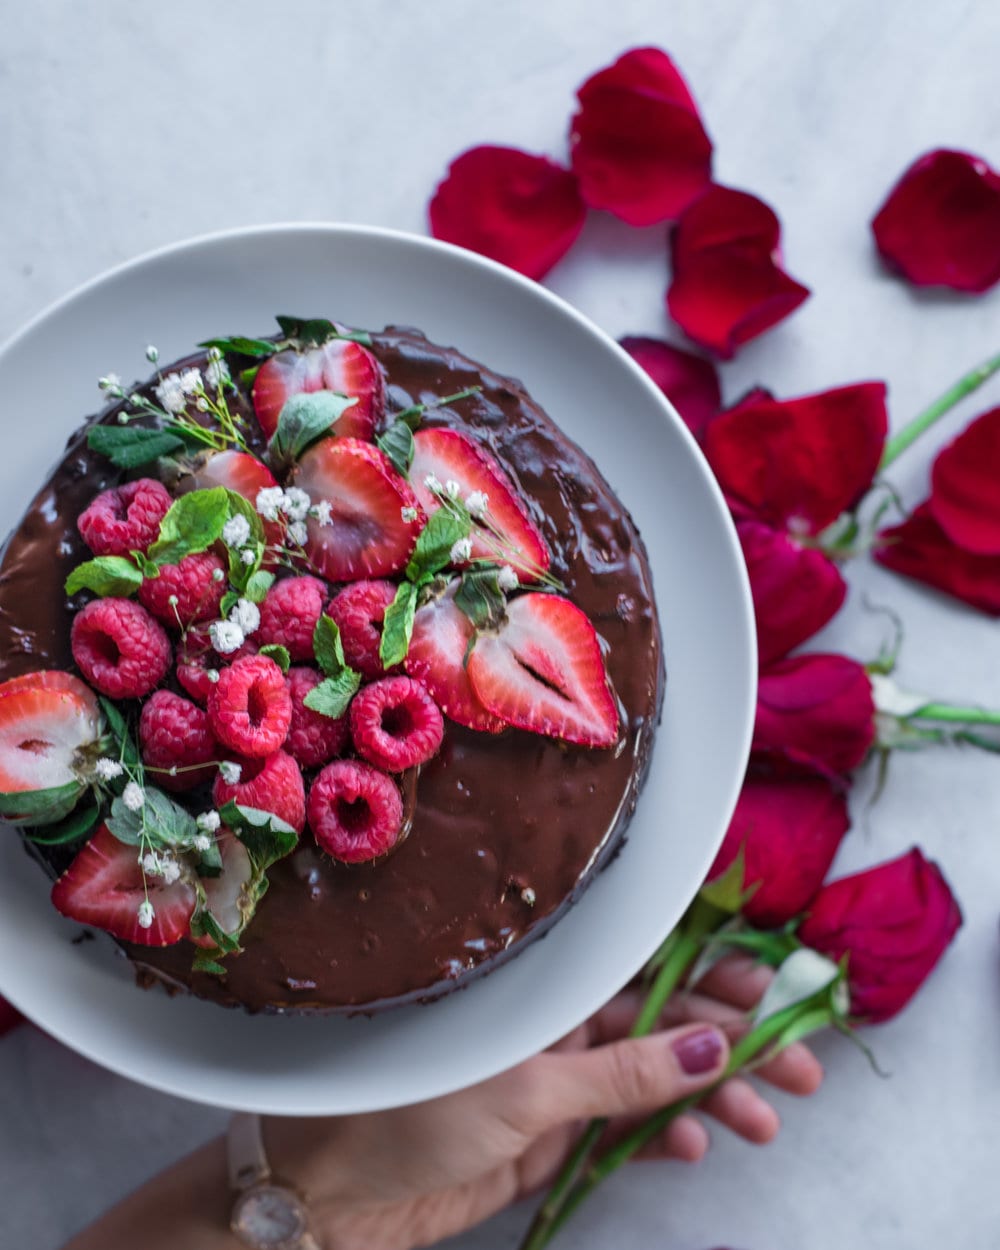 Chocolate Cake with berries on white plate on a white table with rose petals.